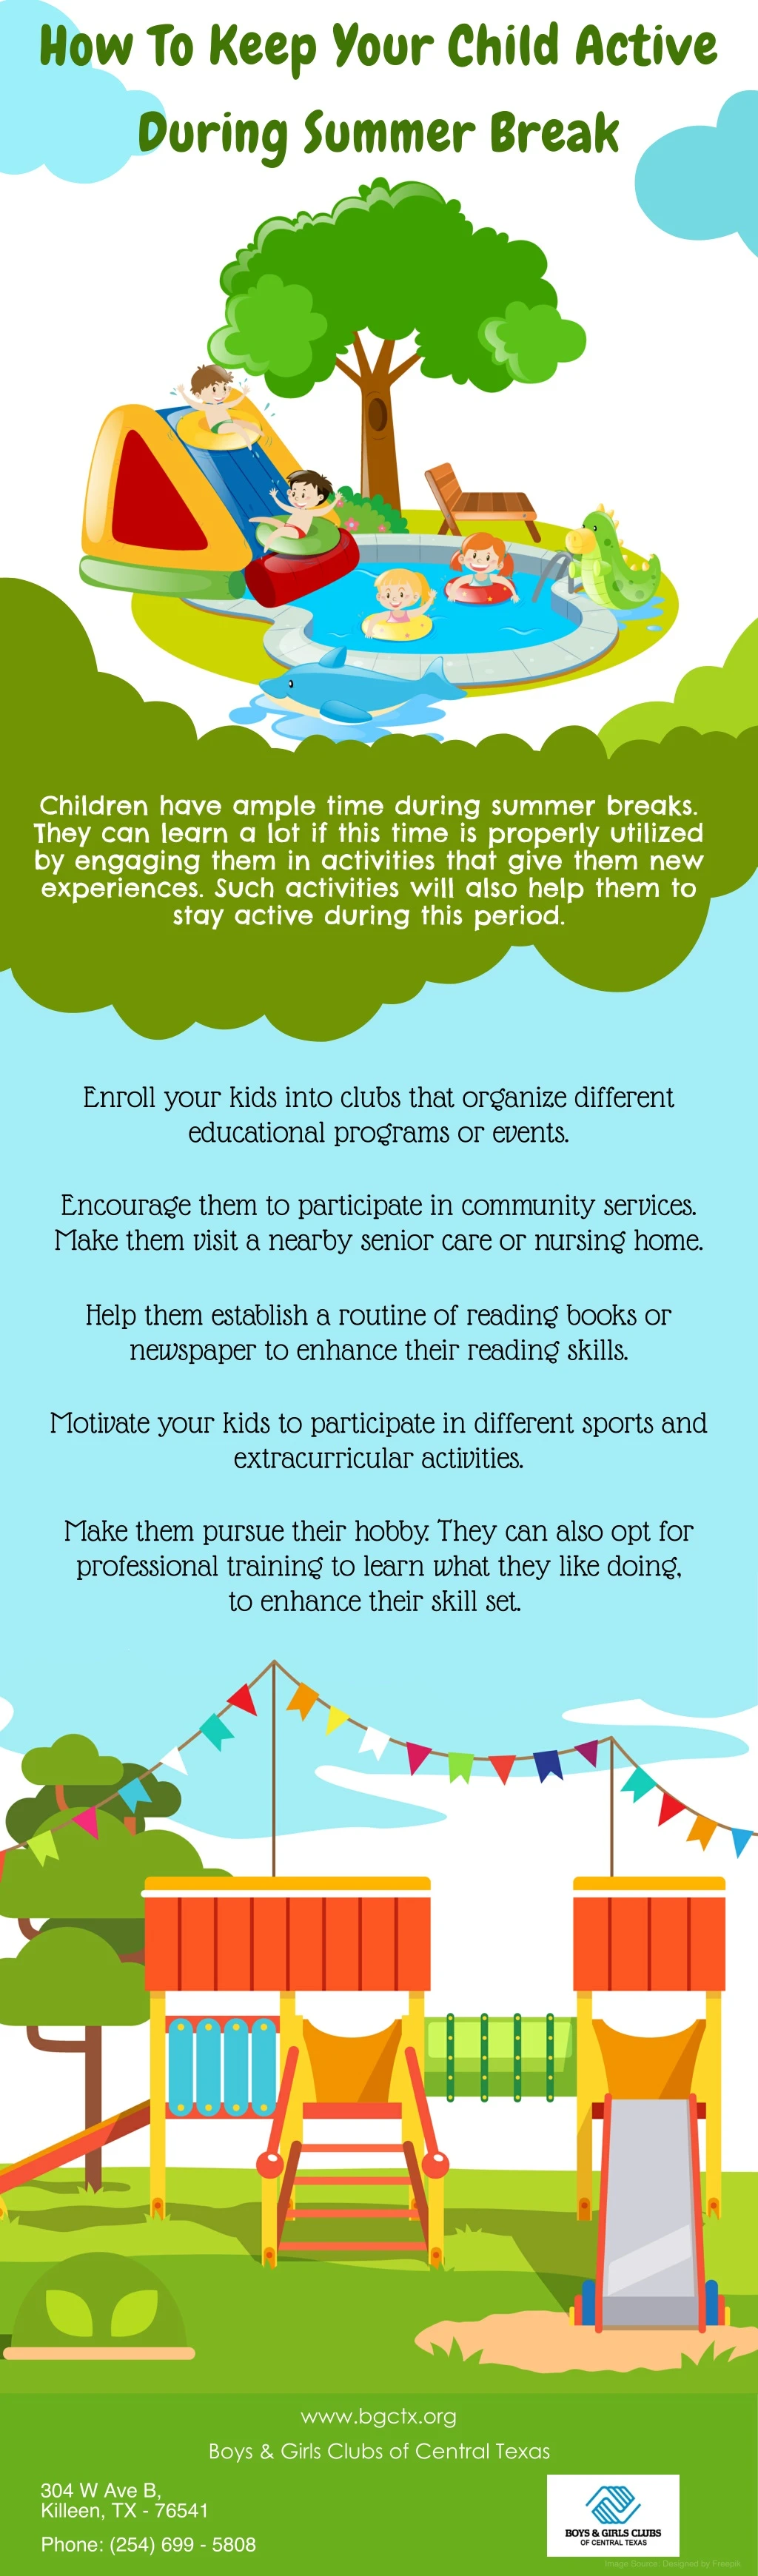 how to keep your child active during summer break